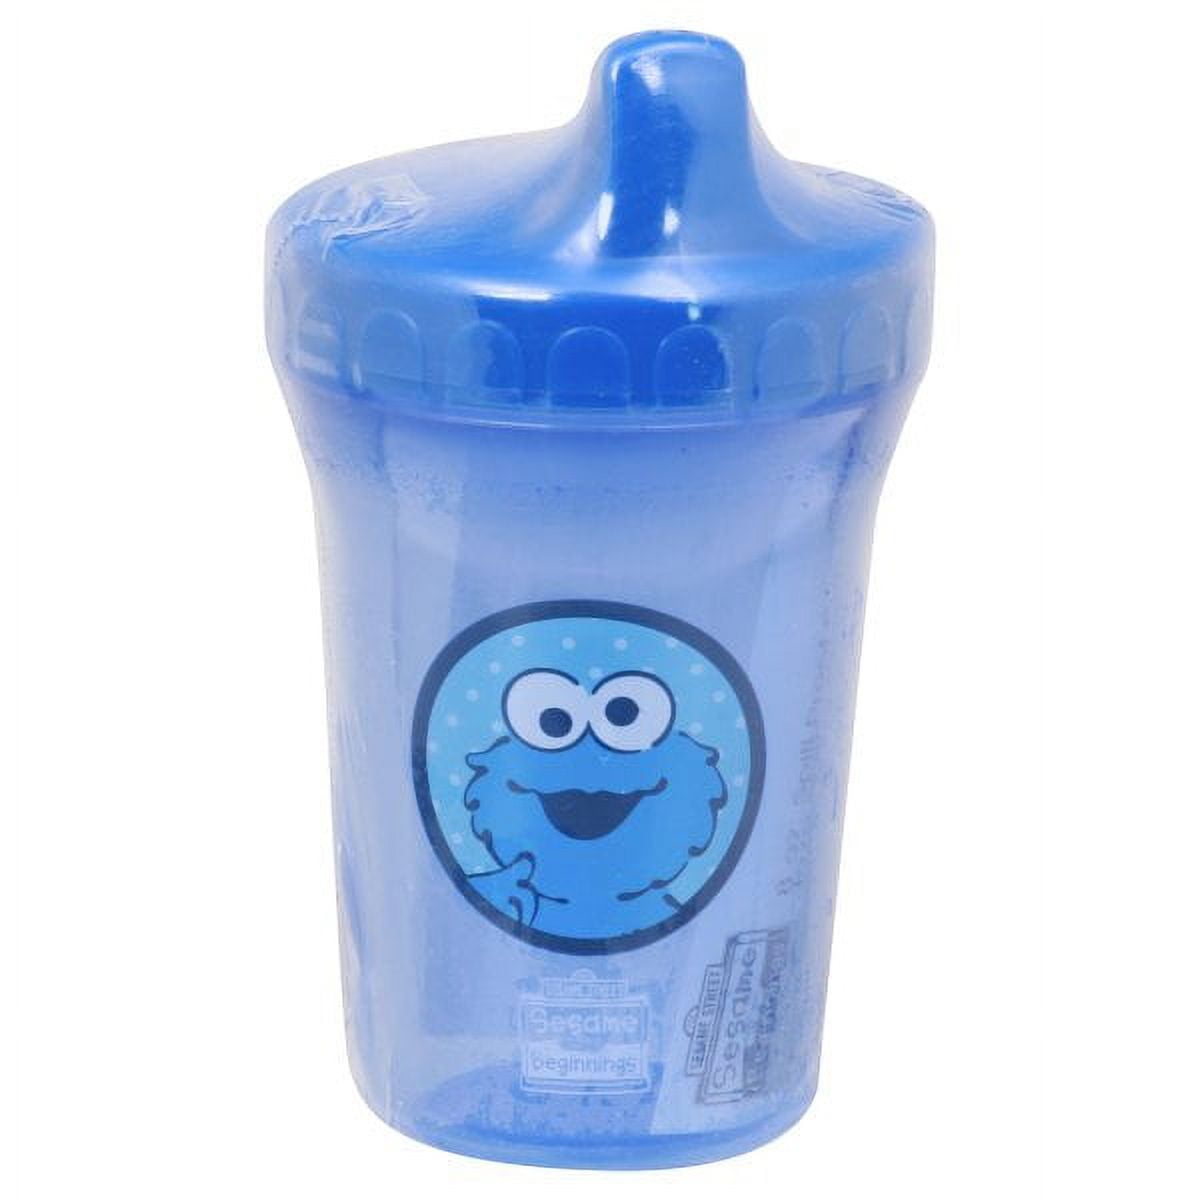 Sesame Street Sippy Cup Spill Proof Tumbler Water Milk Bottle BPA-FREE